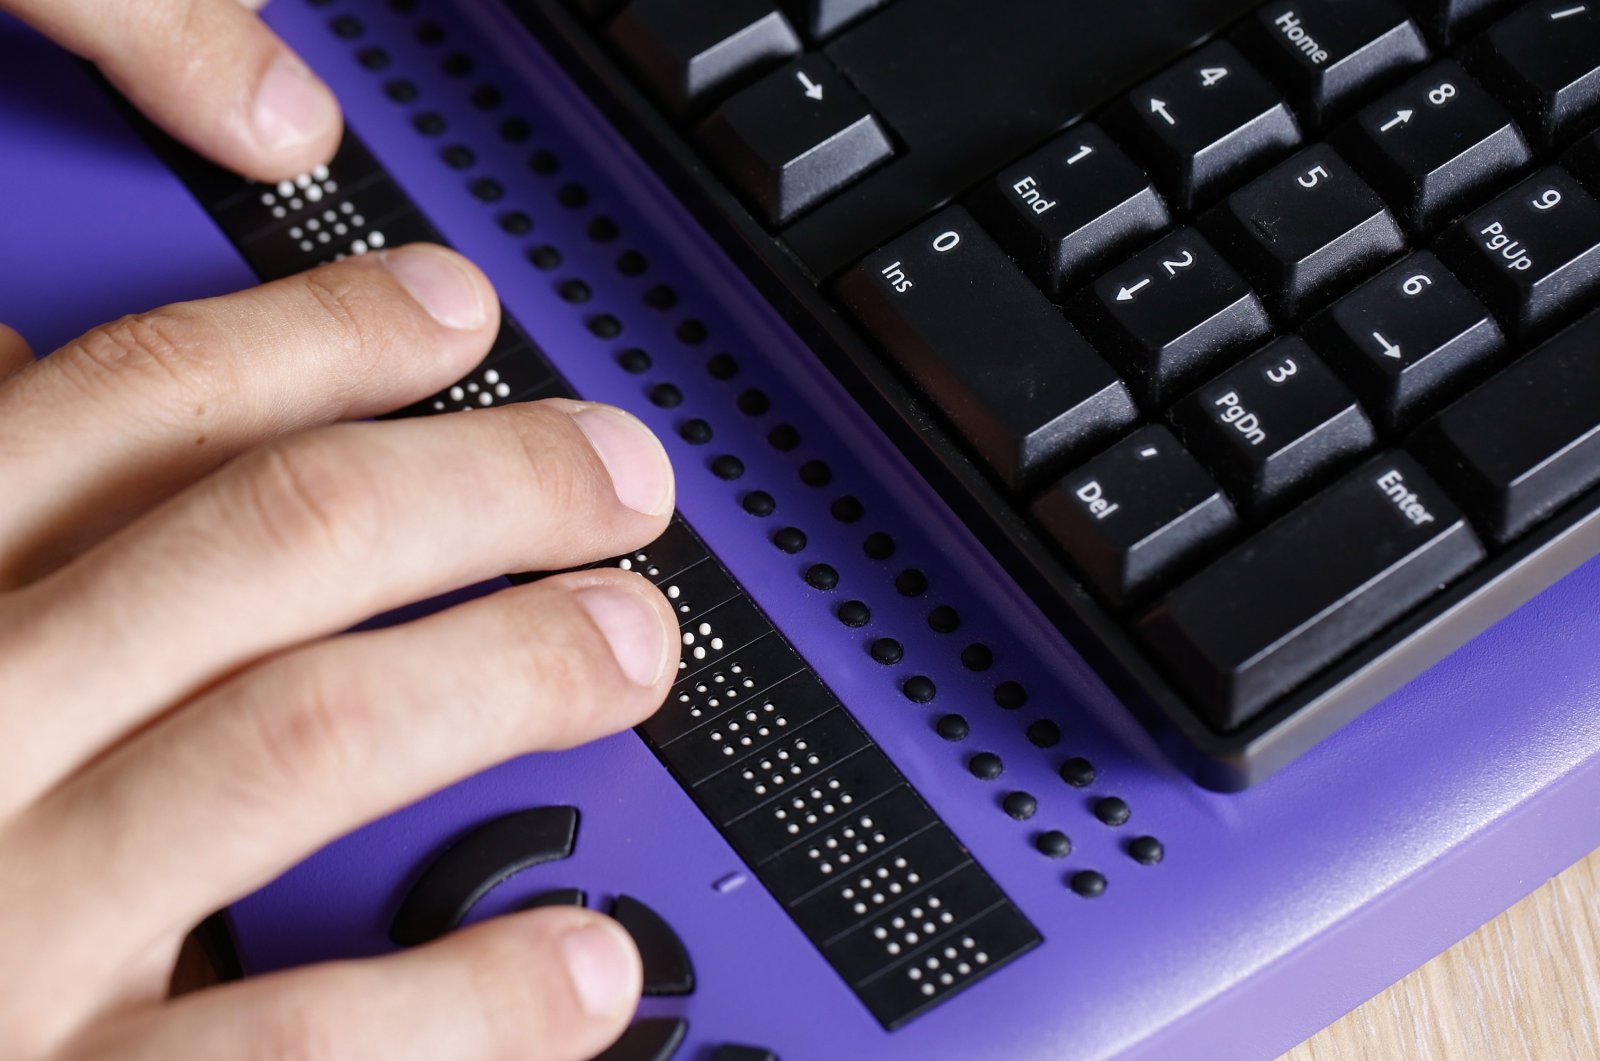 A visually impaired person using a computer with a braille keyboard is shown in this undated photo. (Shutterstock Photo)